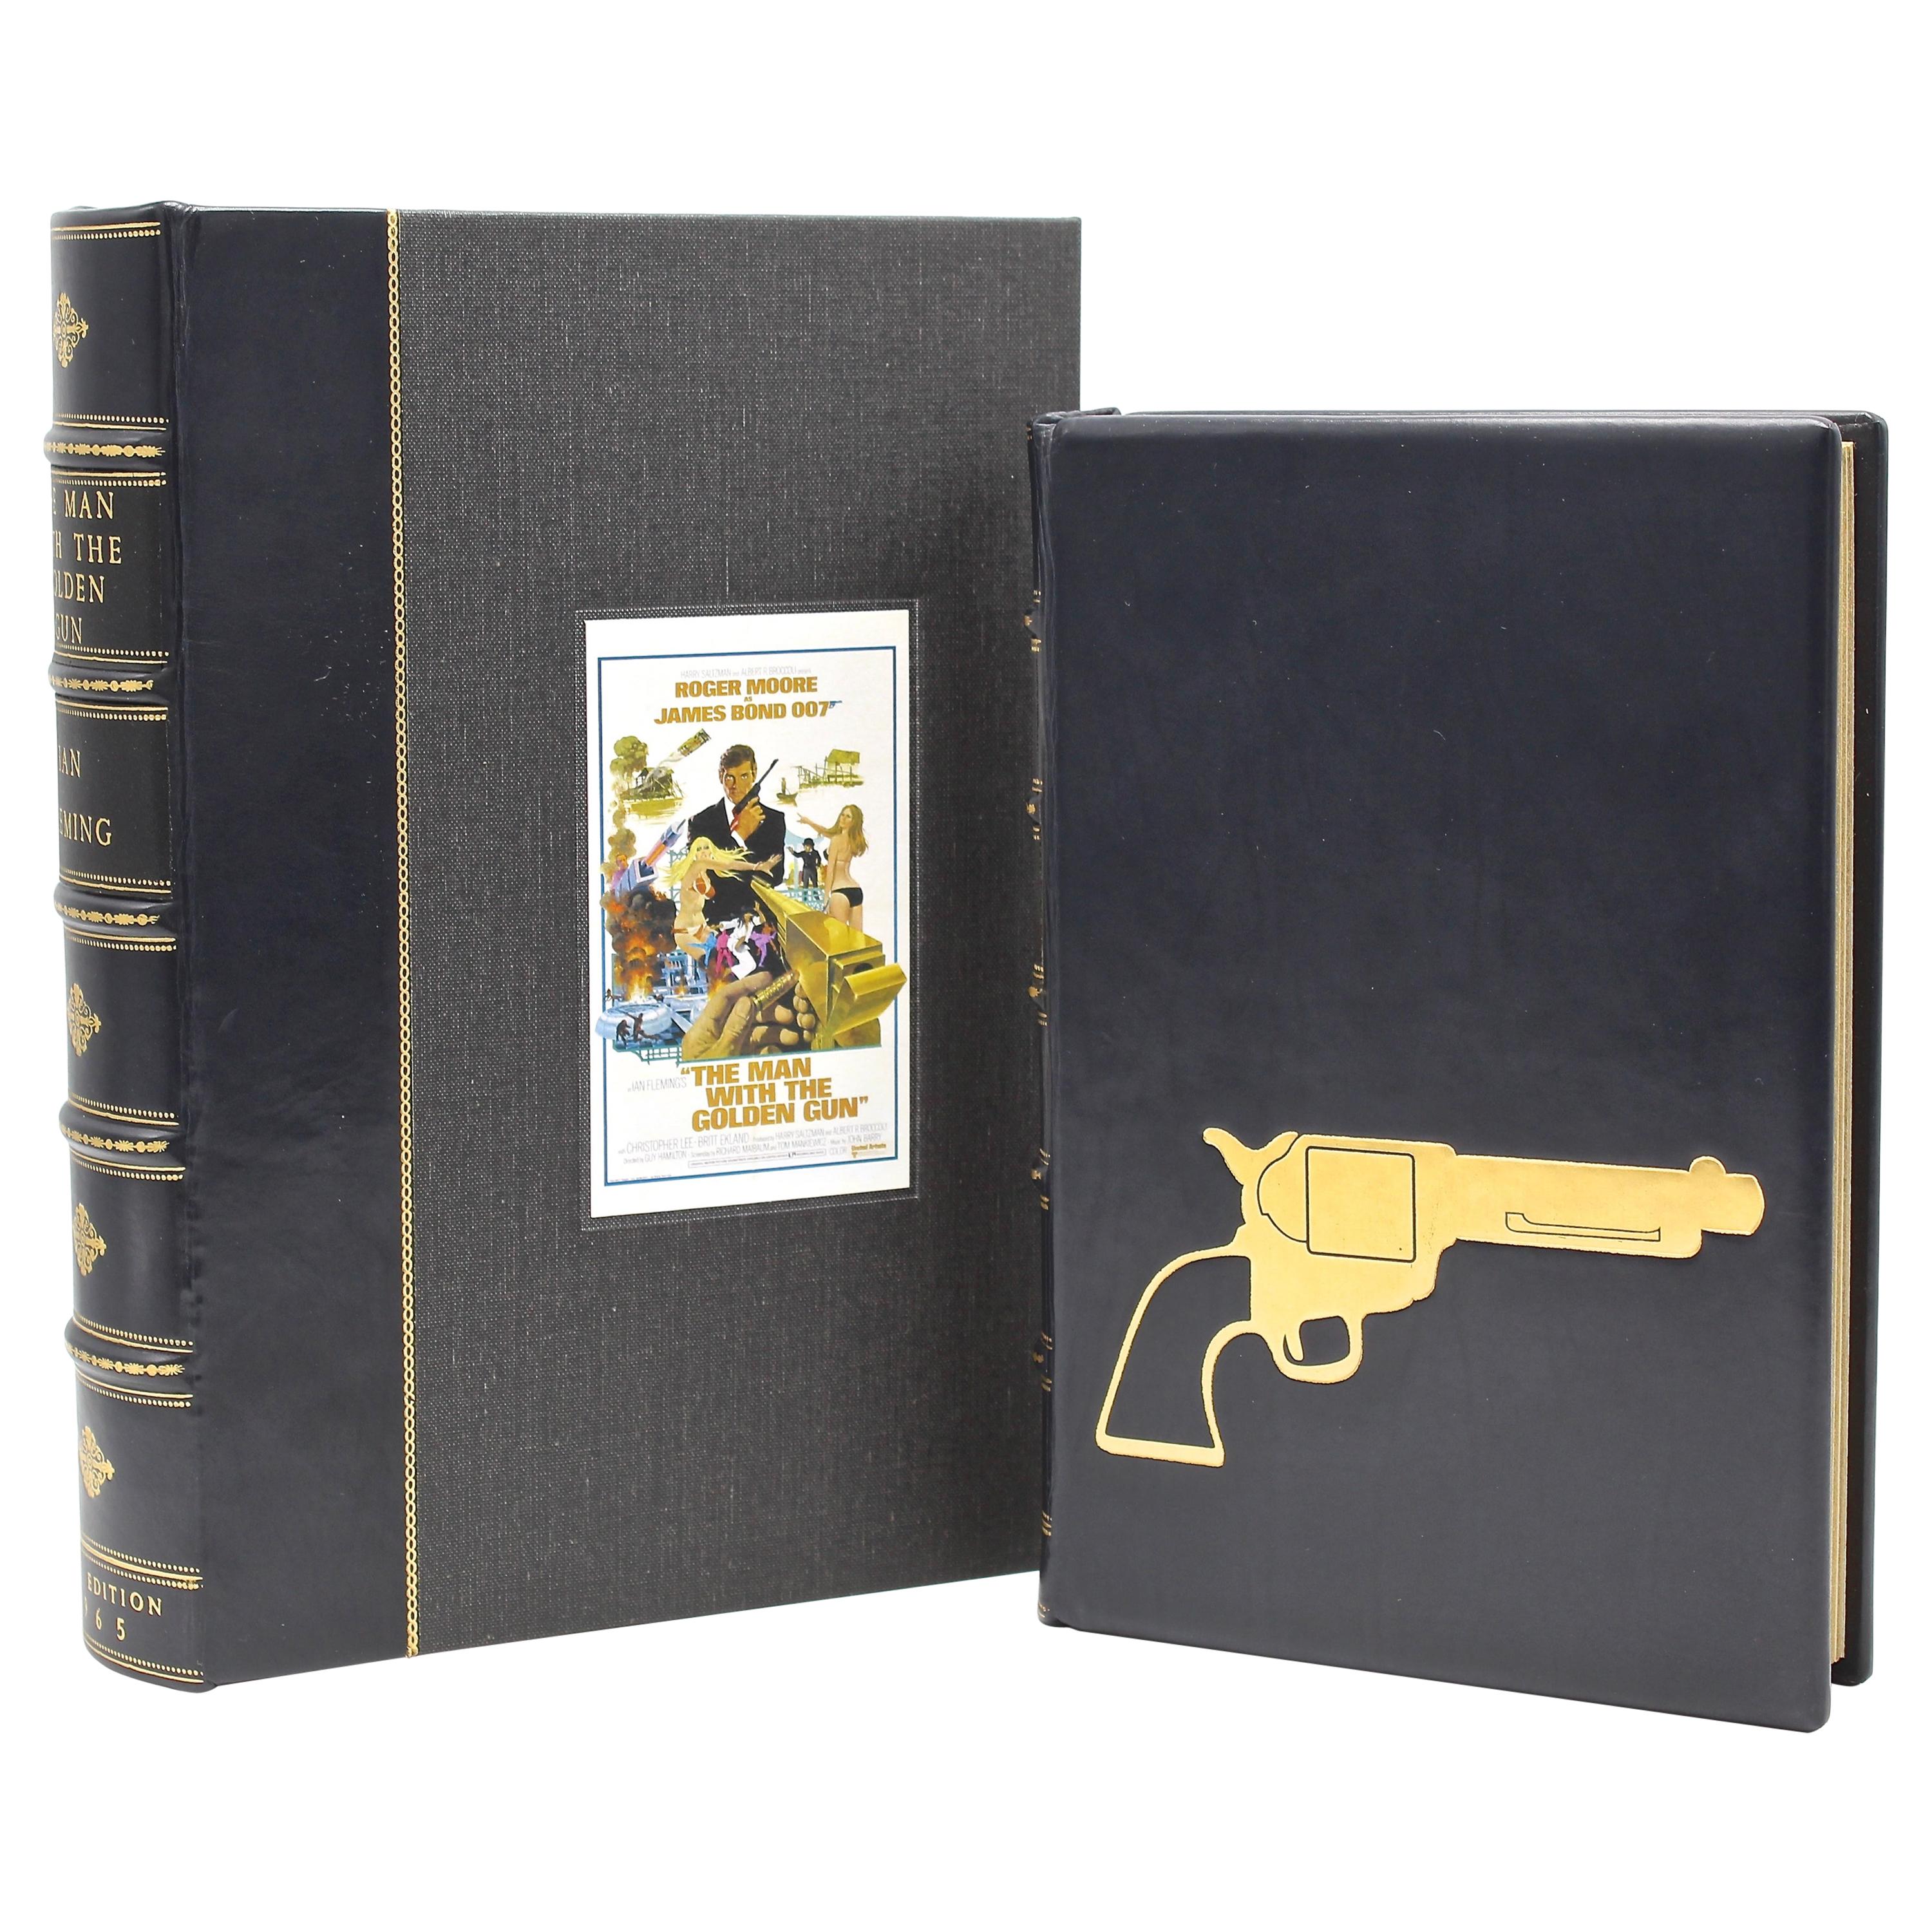 "The Man with the Golden Gun" by Ian Fleming, First Edition, 1965